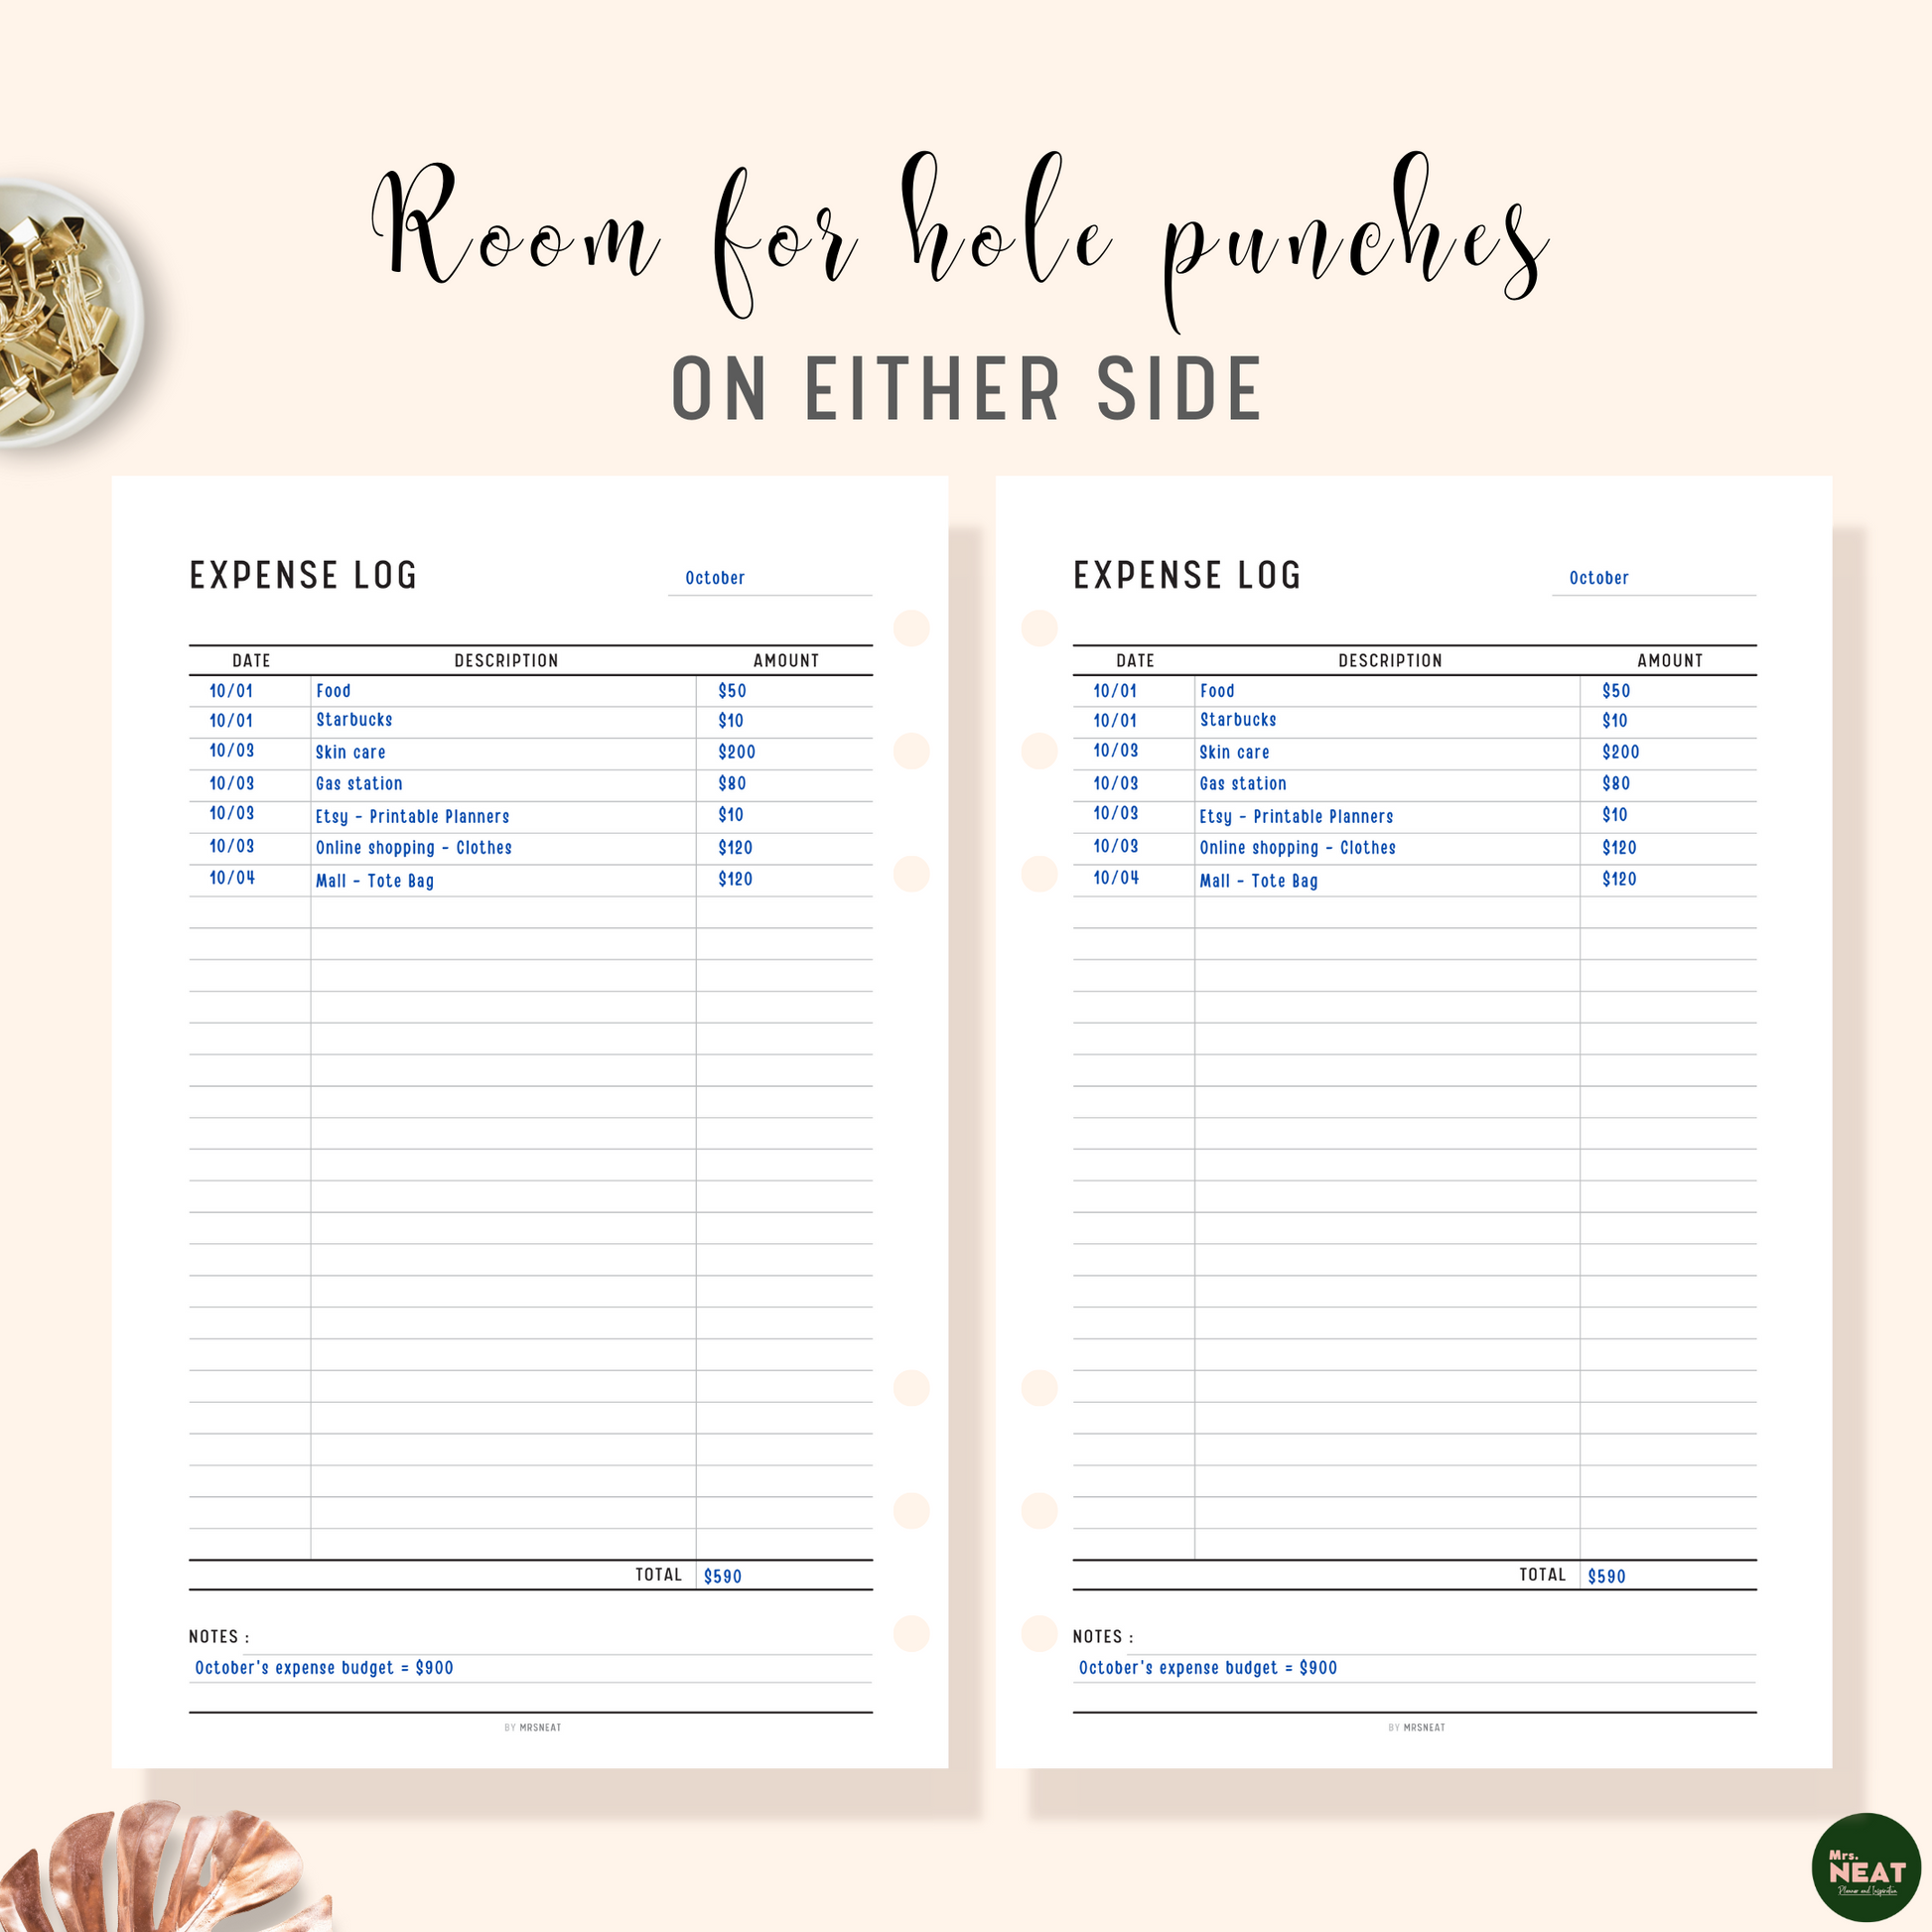 Expense Log Tracker Printable Planner with room for hole punches on either side